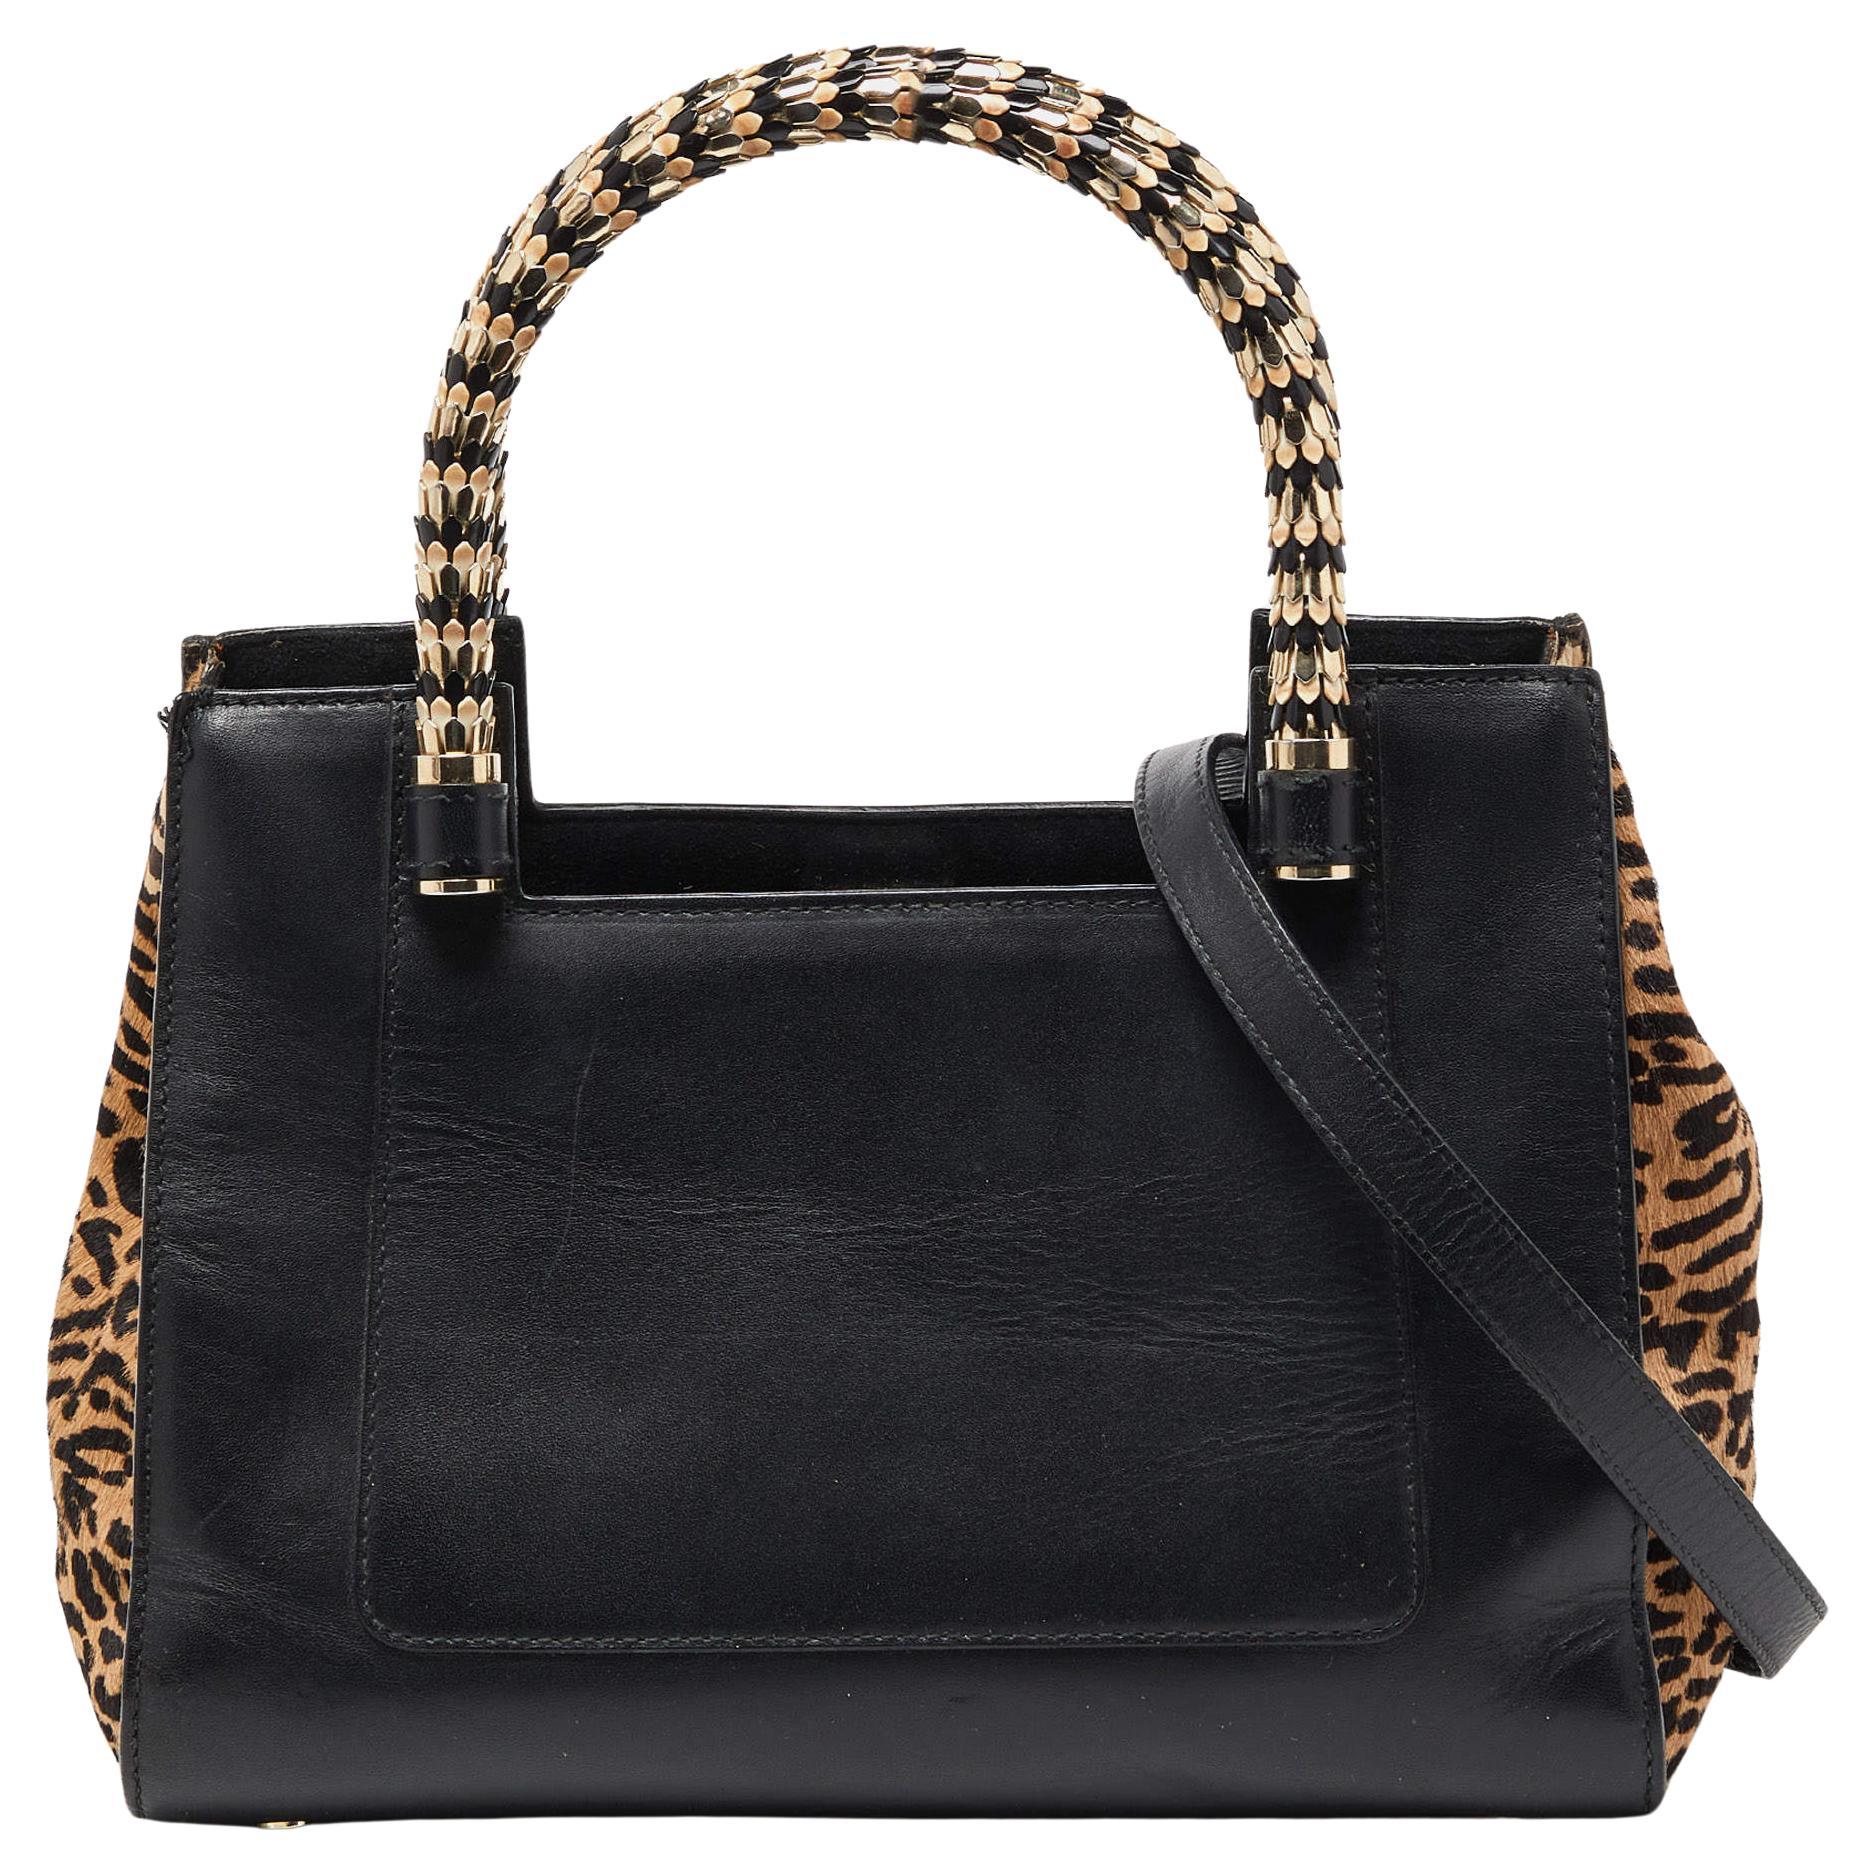 Bvlgari Black/Beige Leather and Calfhair Small Serpenti Scaglie Tote For Sale